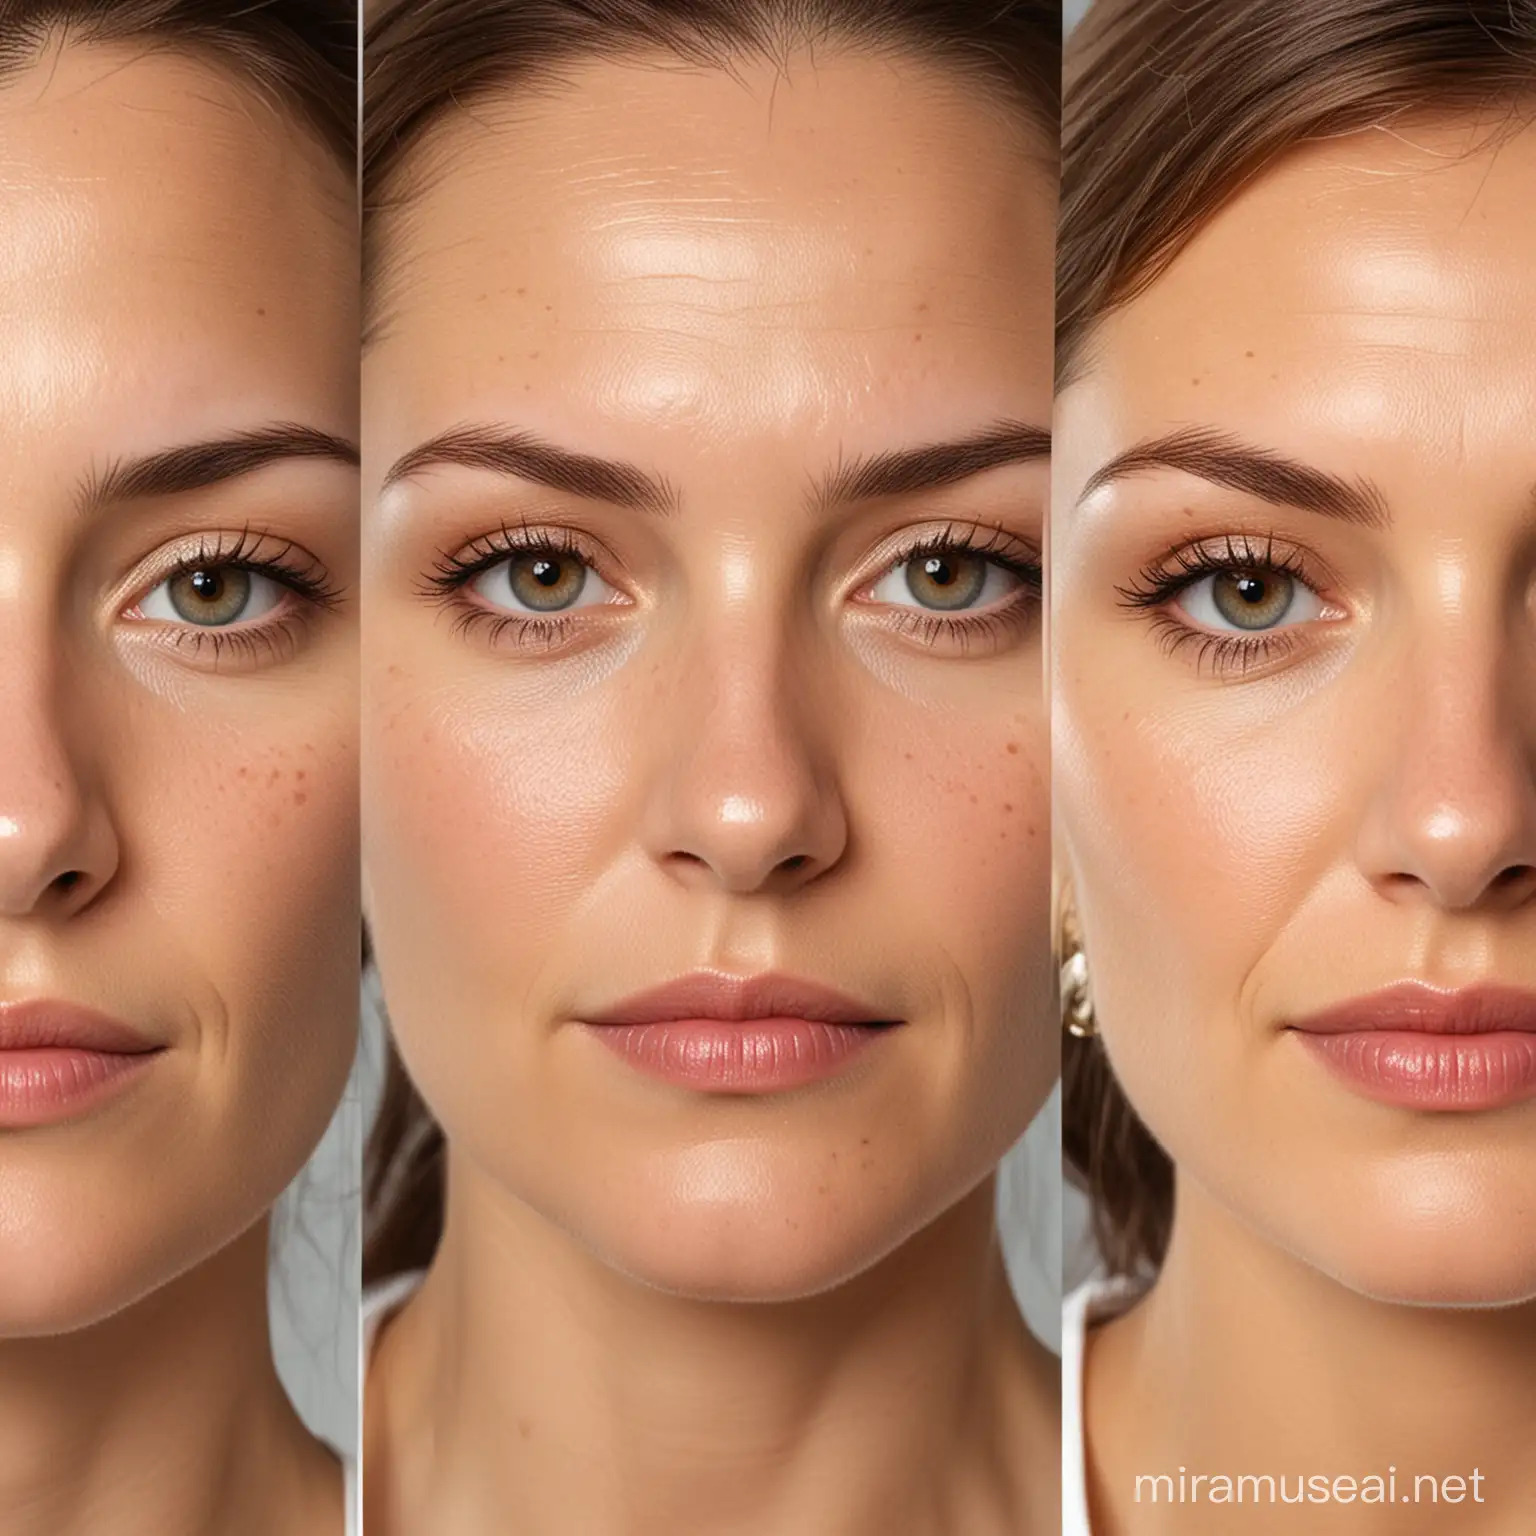 Early Signs of Skin Aging Youthful Woman Examining Fine Lines